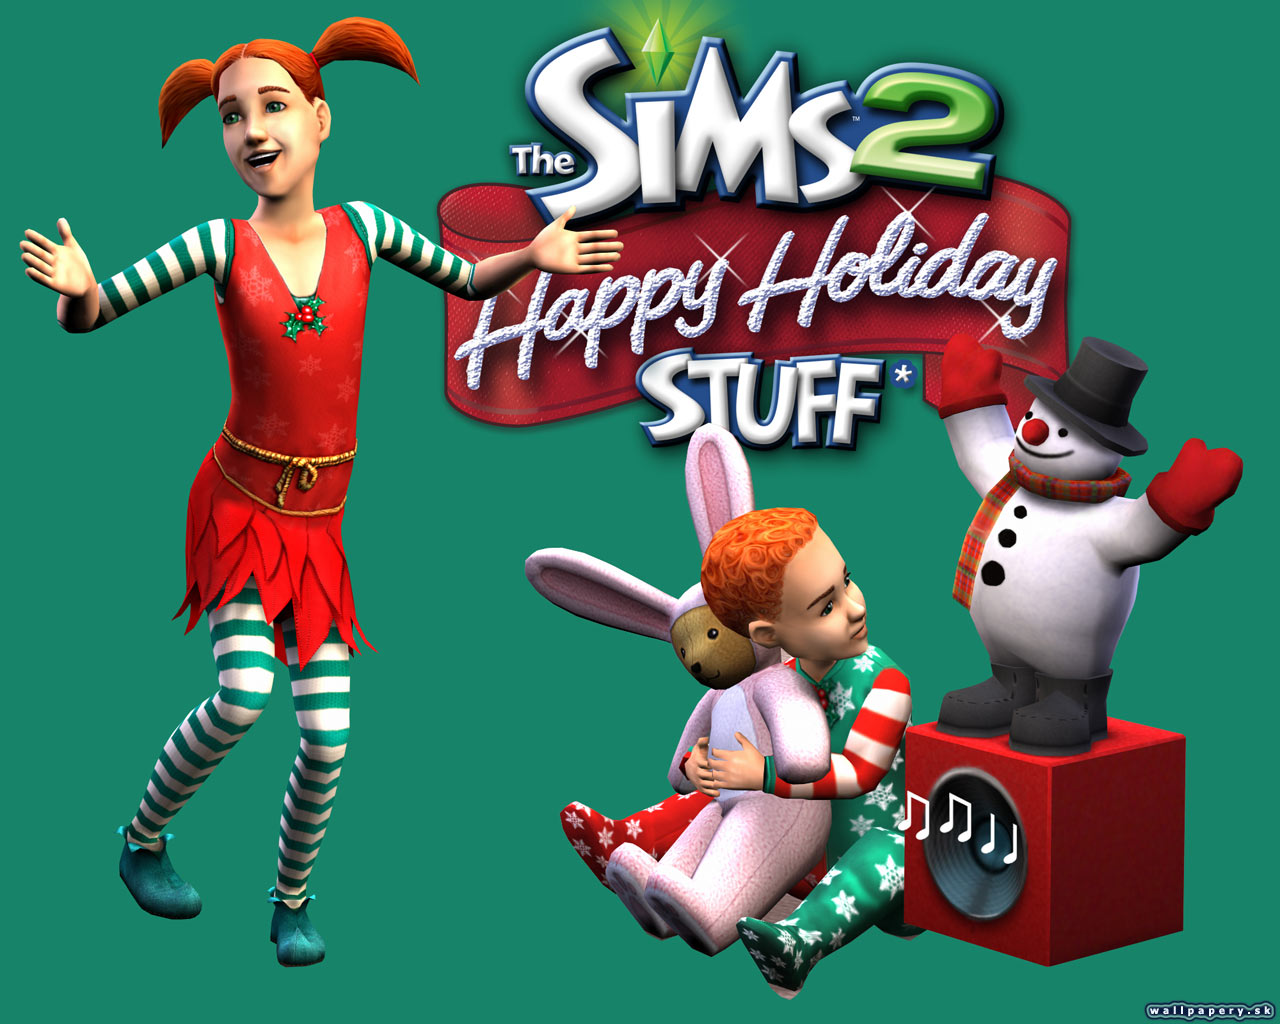 The Sims 2: Happy Holiday Stuff - wallpaper 7